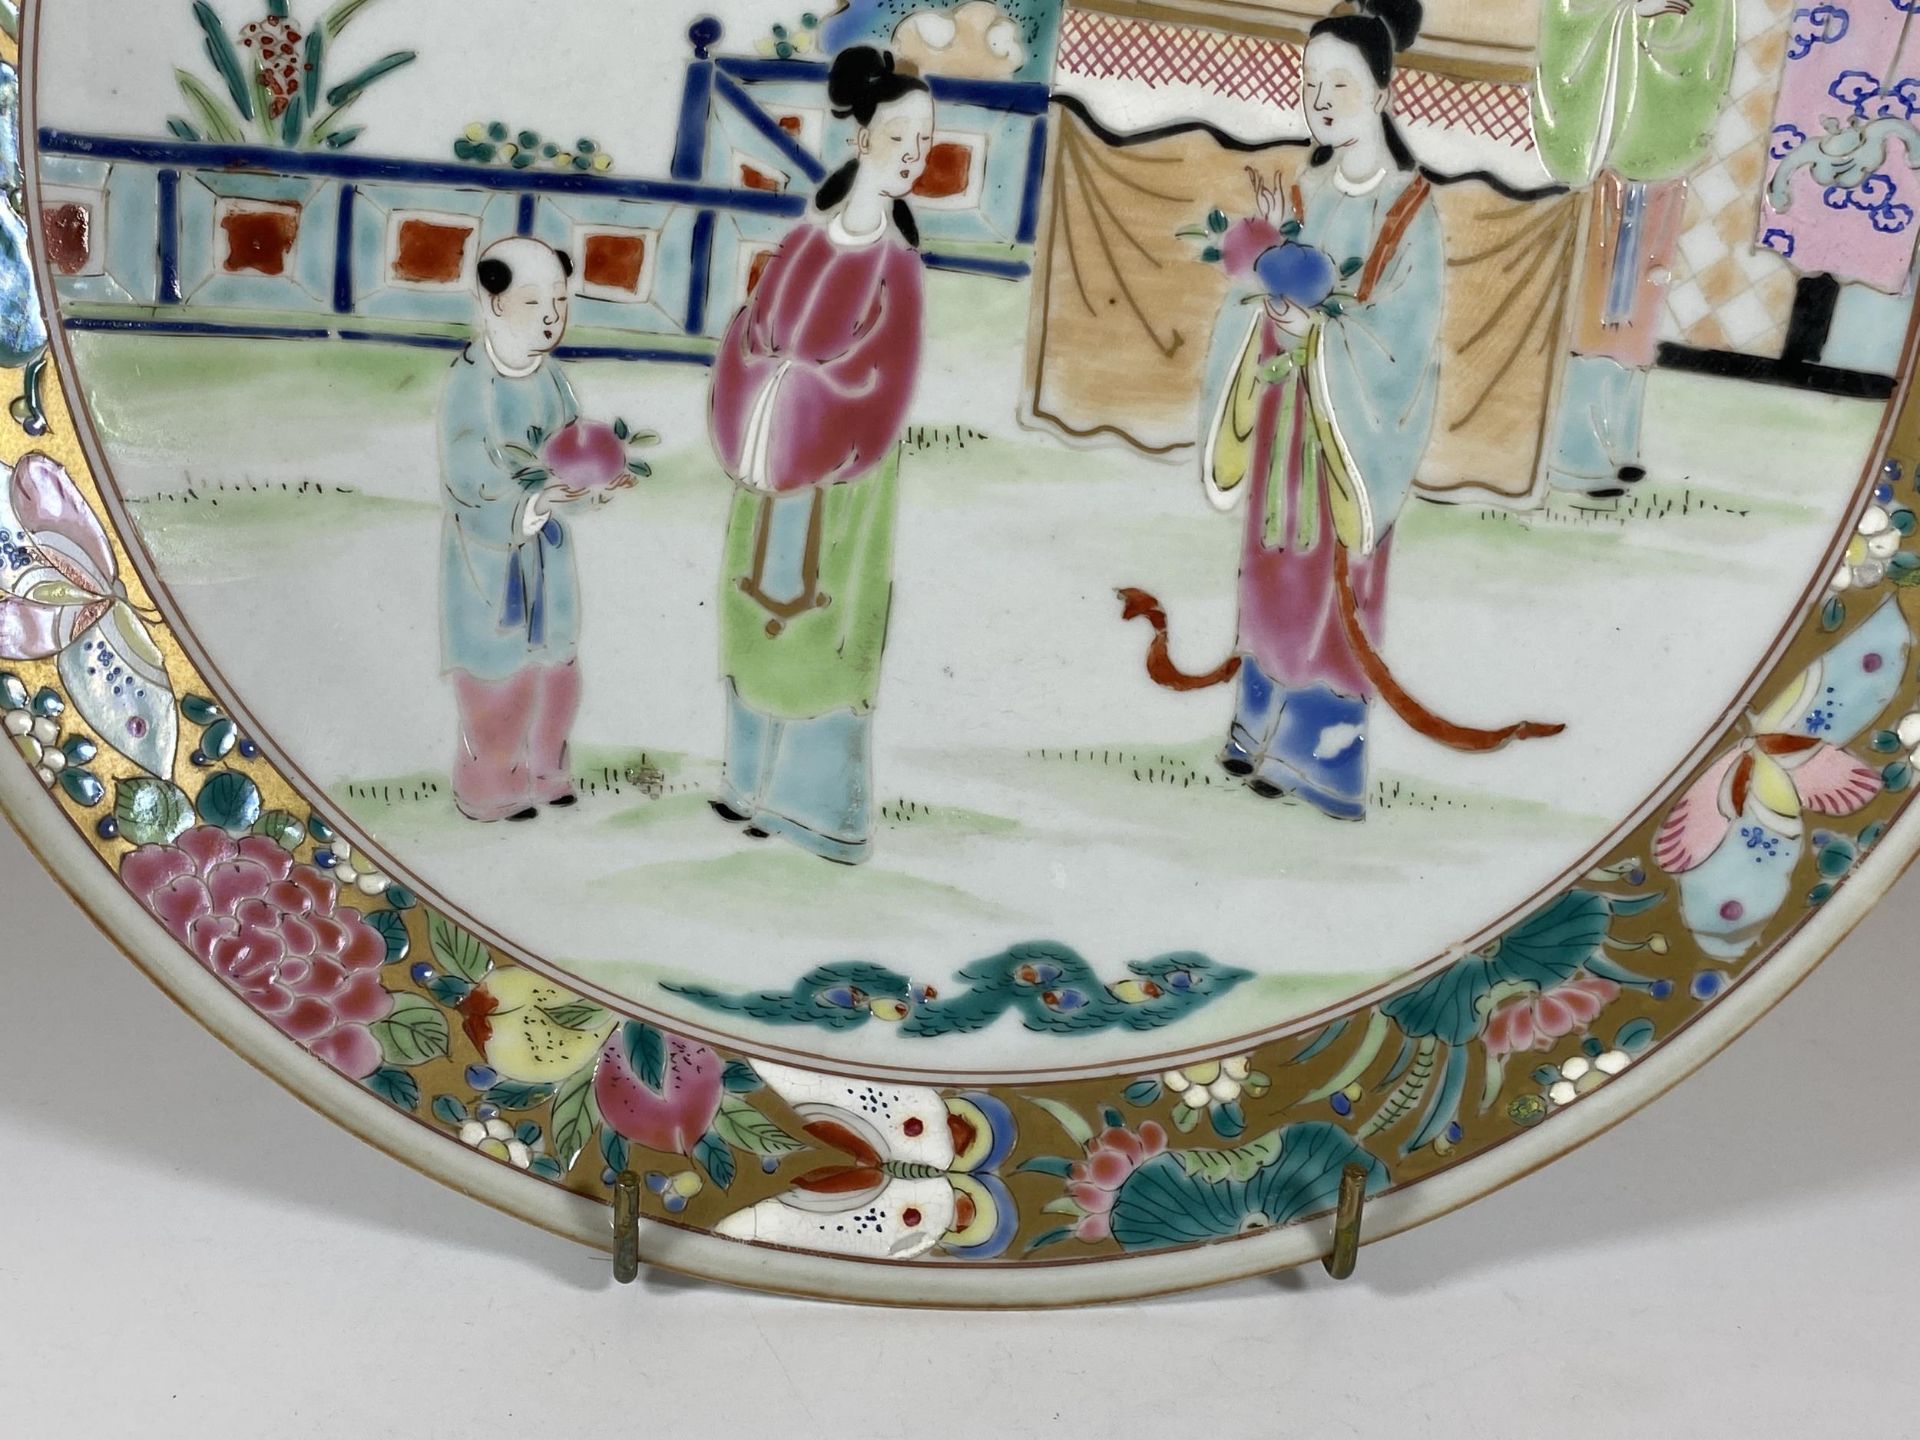 A LARGE CHINESE FAMILLE ROSE PORCELAIN CHARGER WITH FIGURAL DESIGN, SIGNED TO BASE, DIAMETER 31CM - Image 4 of 7